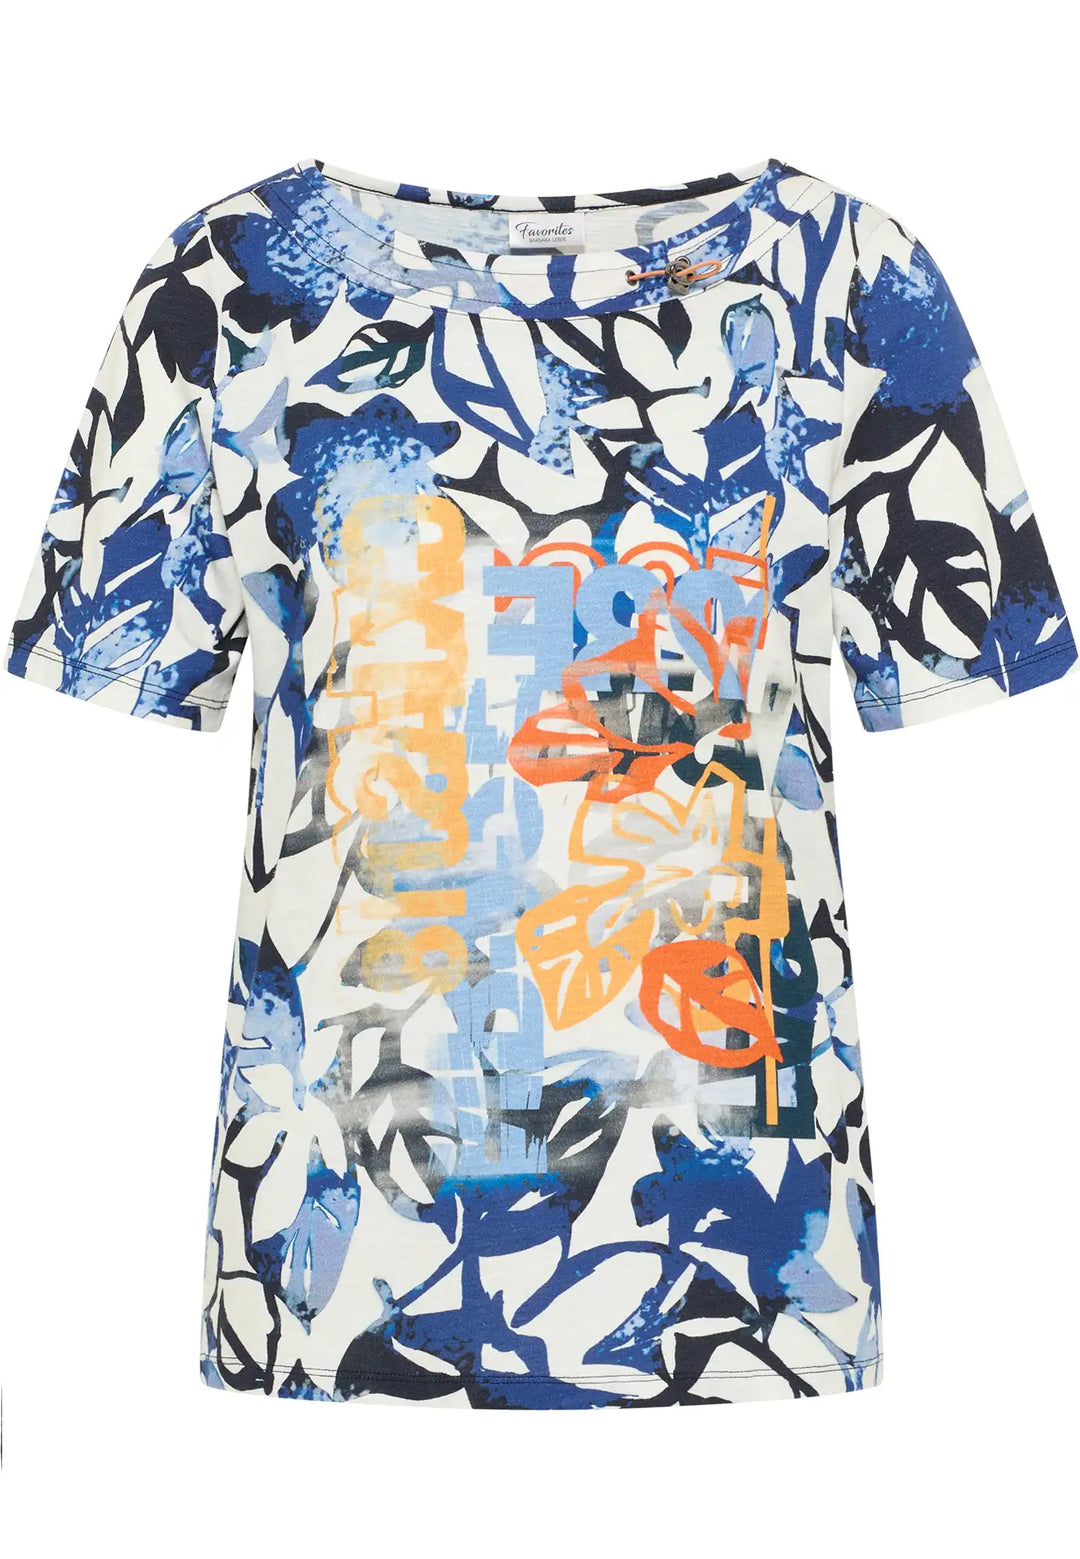 Vibrant abstract-patterned top with a mix of blue, white, and orange, featuring a round neck and short sleeves for a stylish, comfortable wear, style 55690042-870